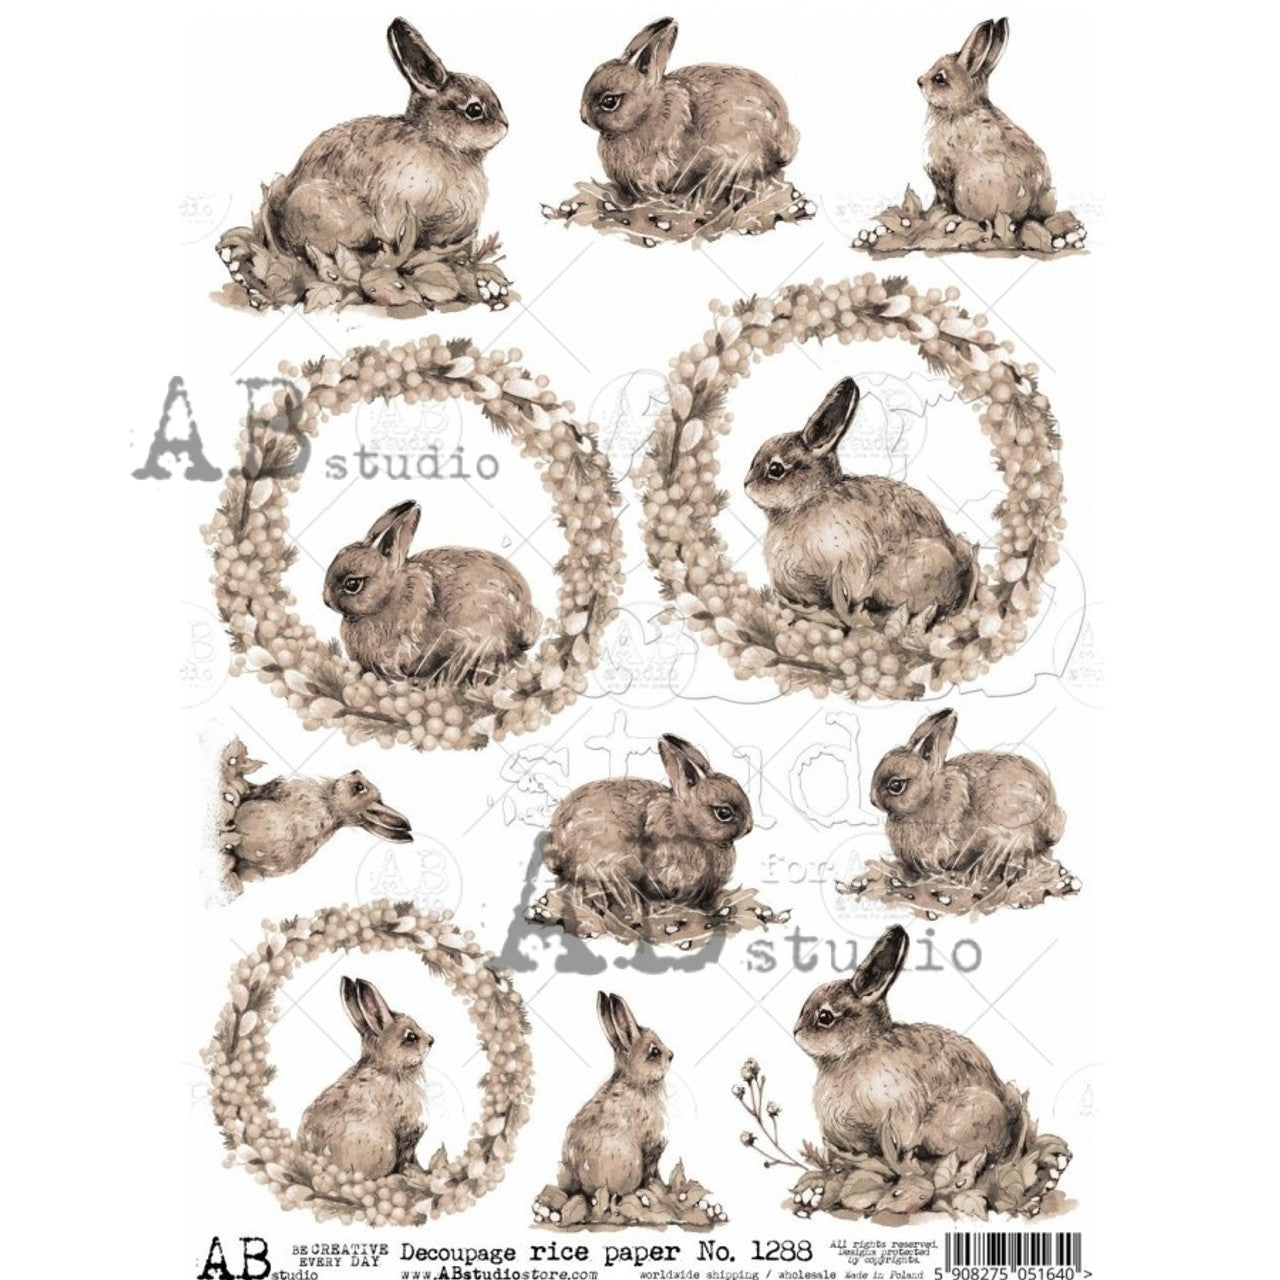 AB Studios A4 Rice Paper for Decoupage Sepia Bunny Rabbits 1288